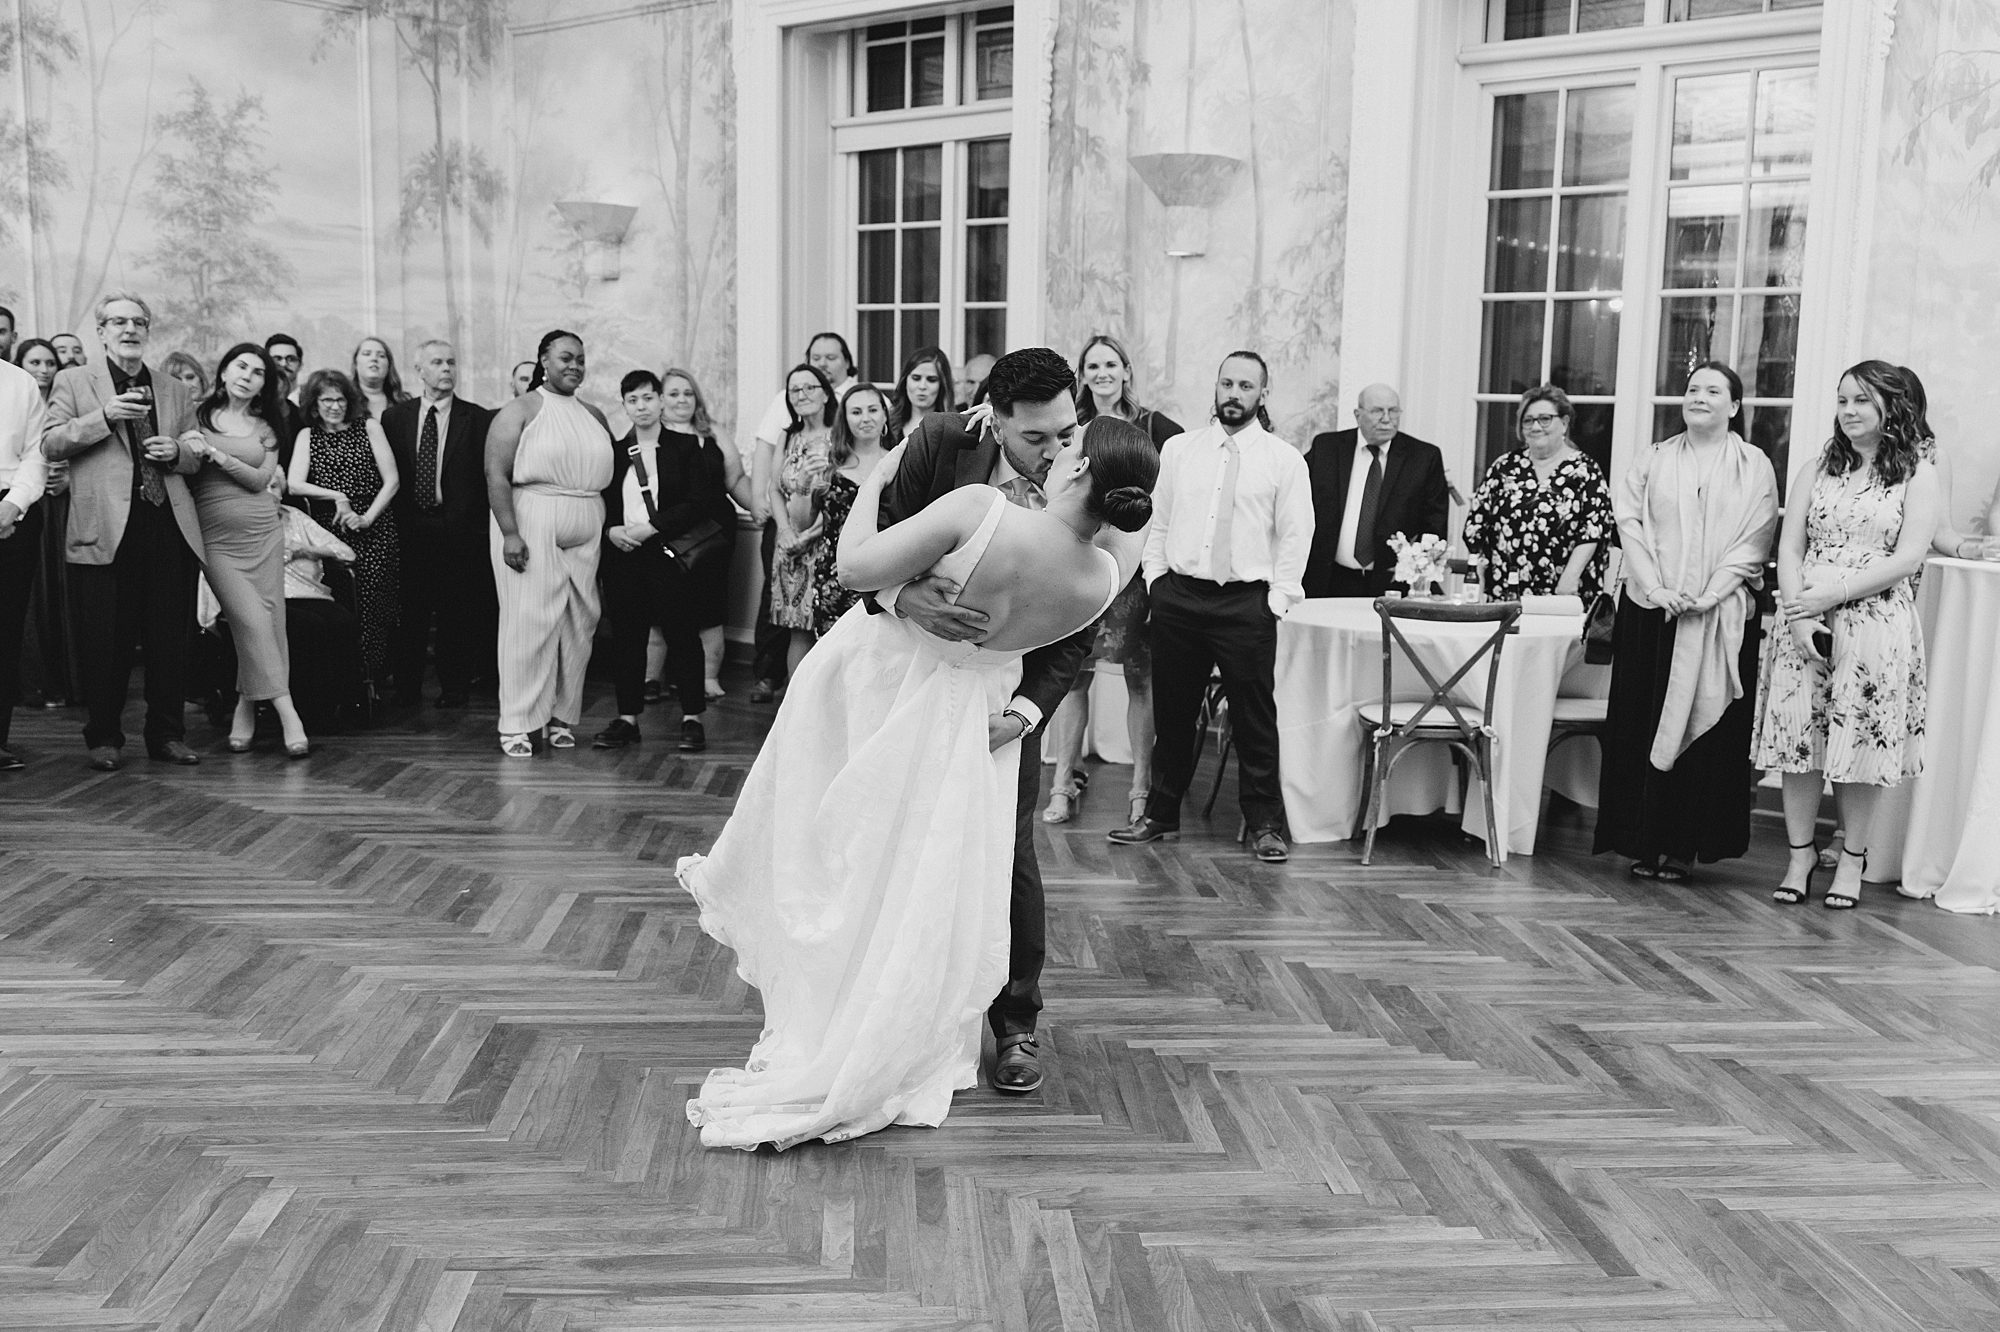 husband and wife share first dance together 